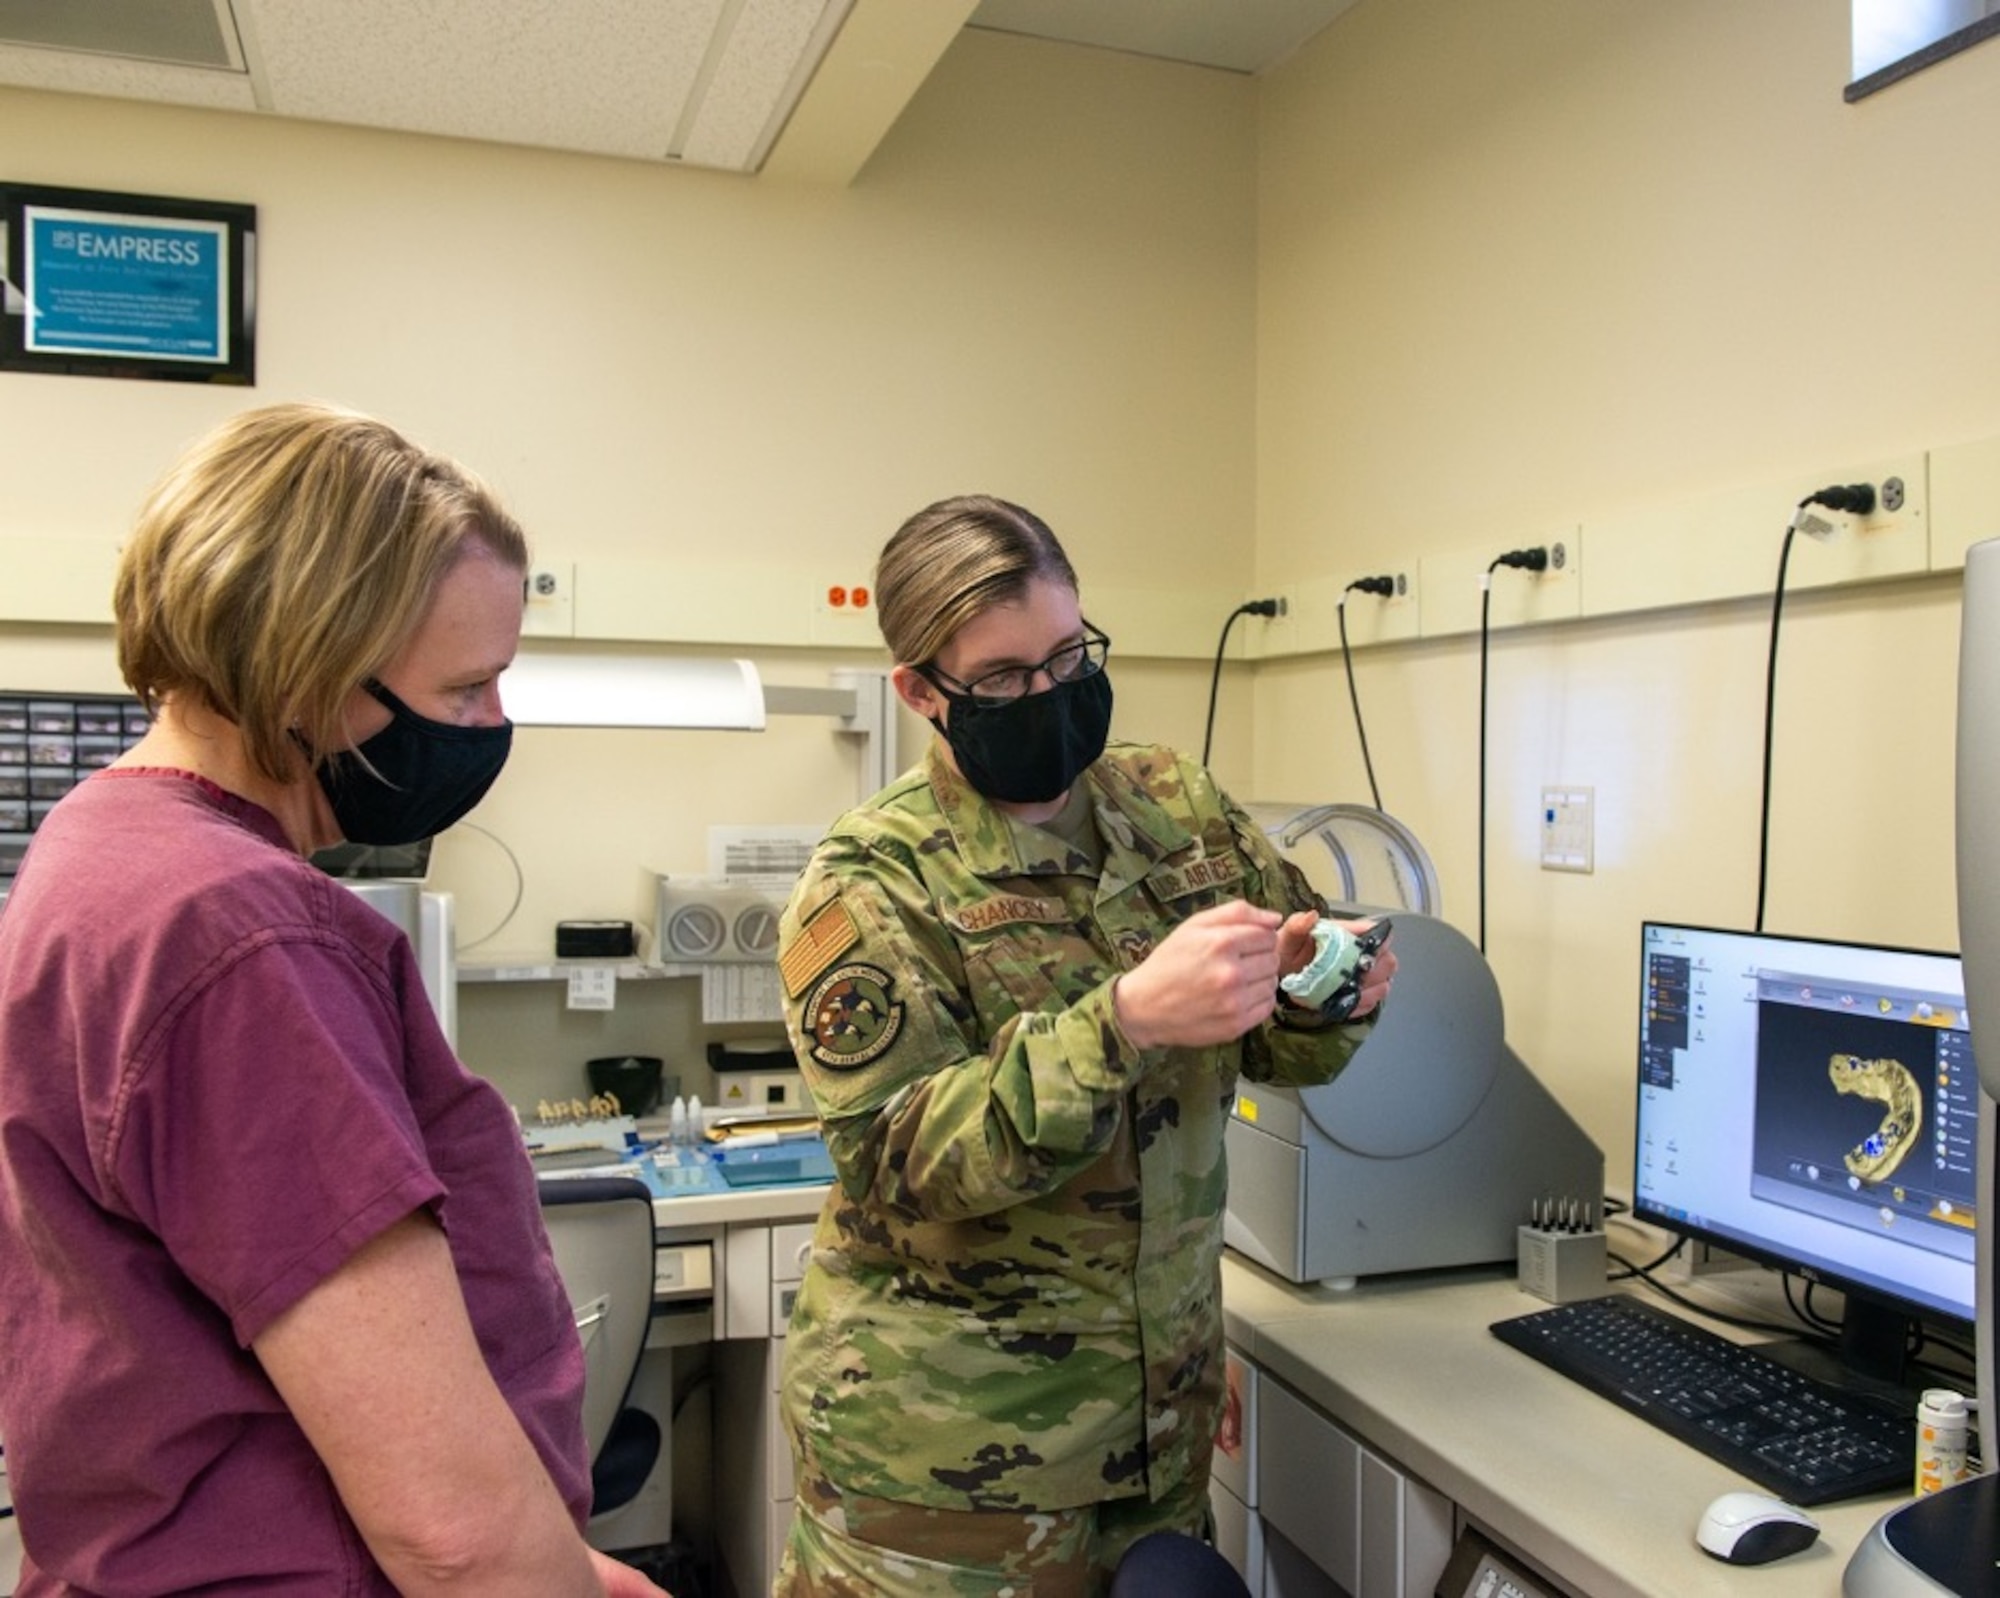 U.S. Air Force Staff Sgt. Aimee Chancey, right, a dental laboratory technician assigned to the 673d Dental Squadron, shows a model camera for crowns and implants to U.S. Air Force Col. Kirsten Aguilar, Joint Base Elmendorf-Richardson and 673d Air Base Wing commander, at JBER, Alaska, March 2, 2021.